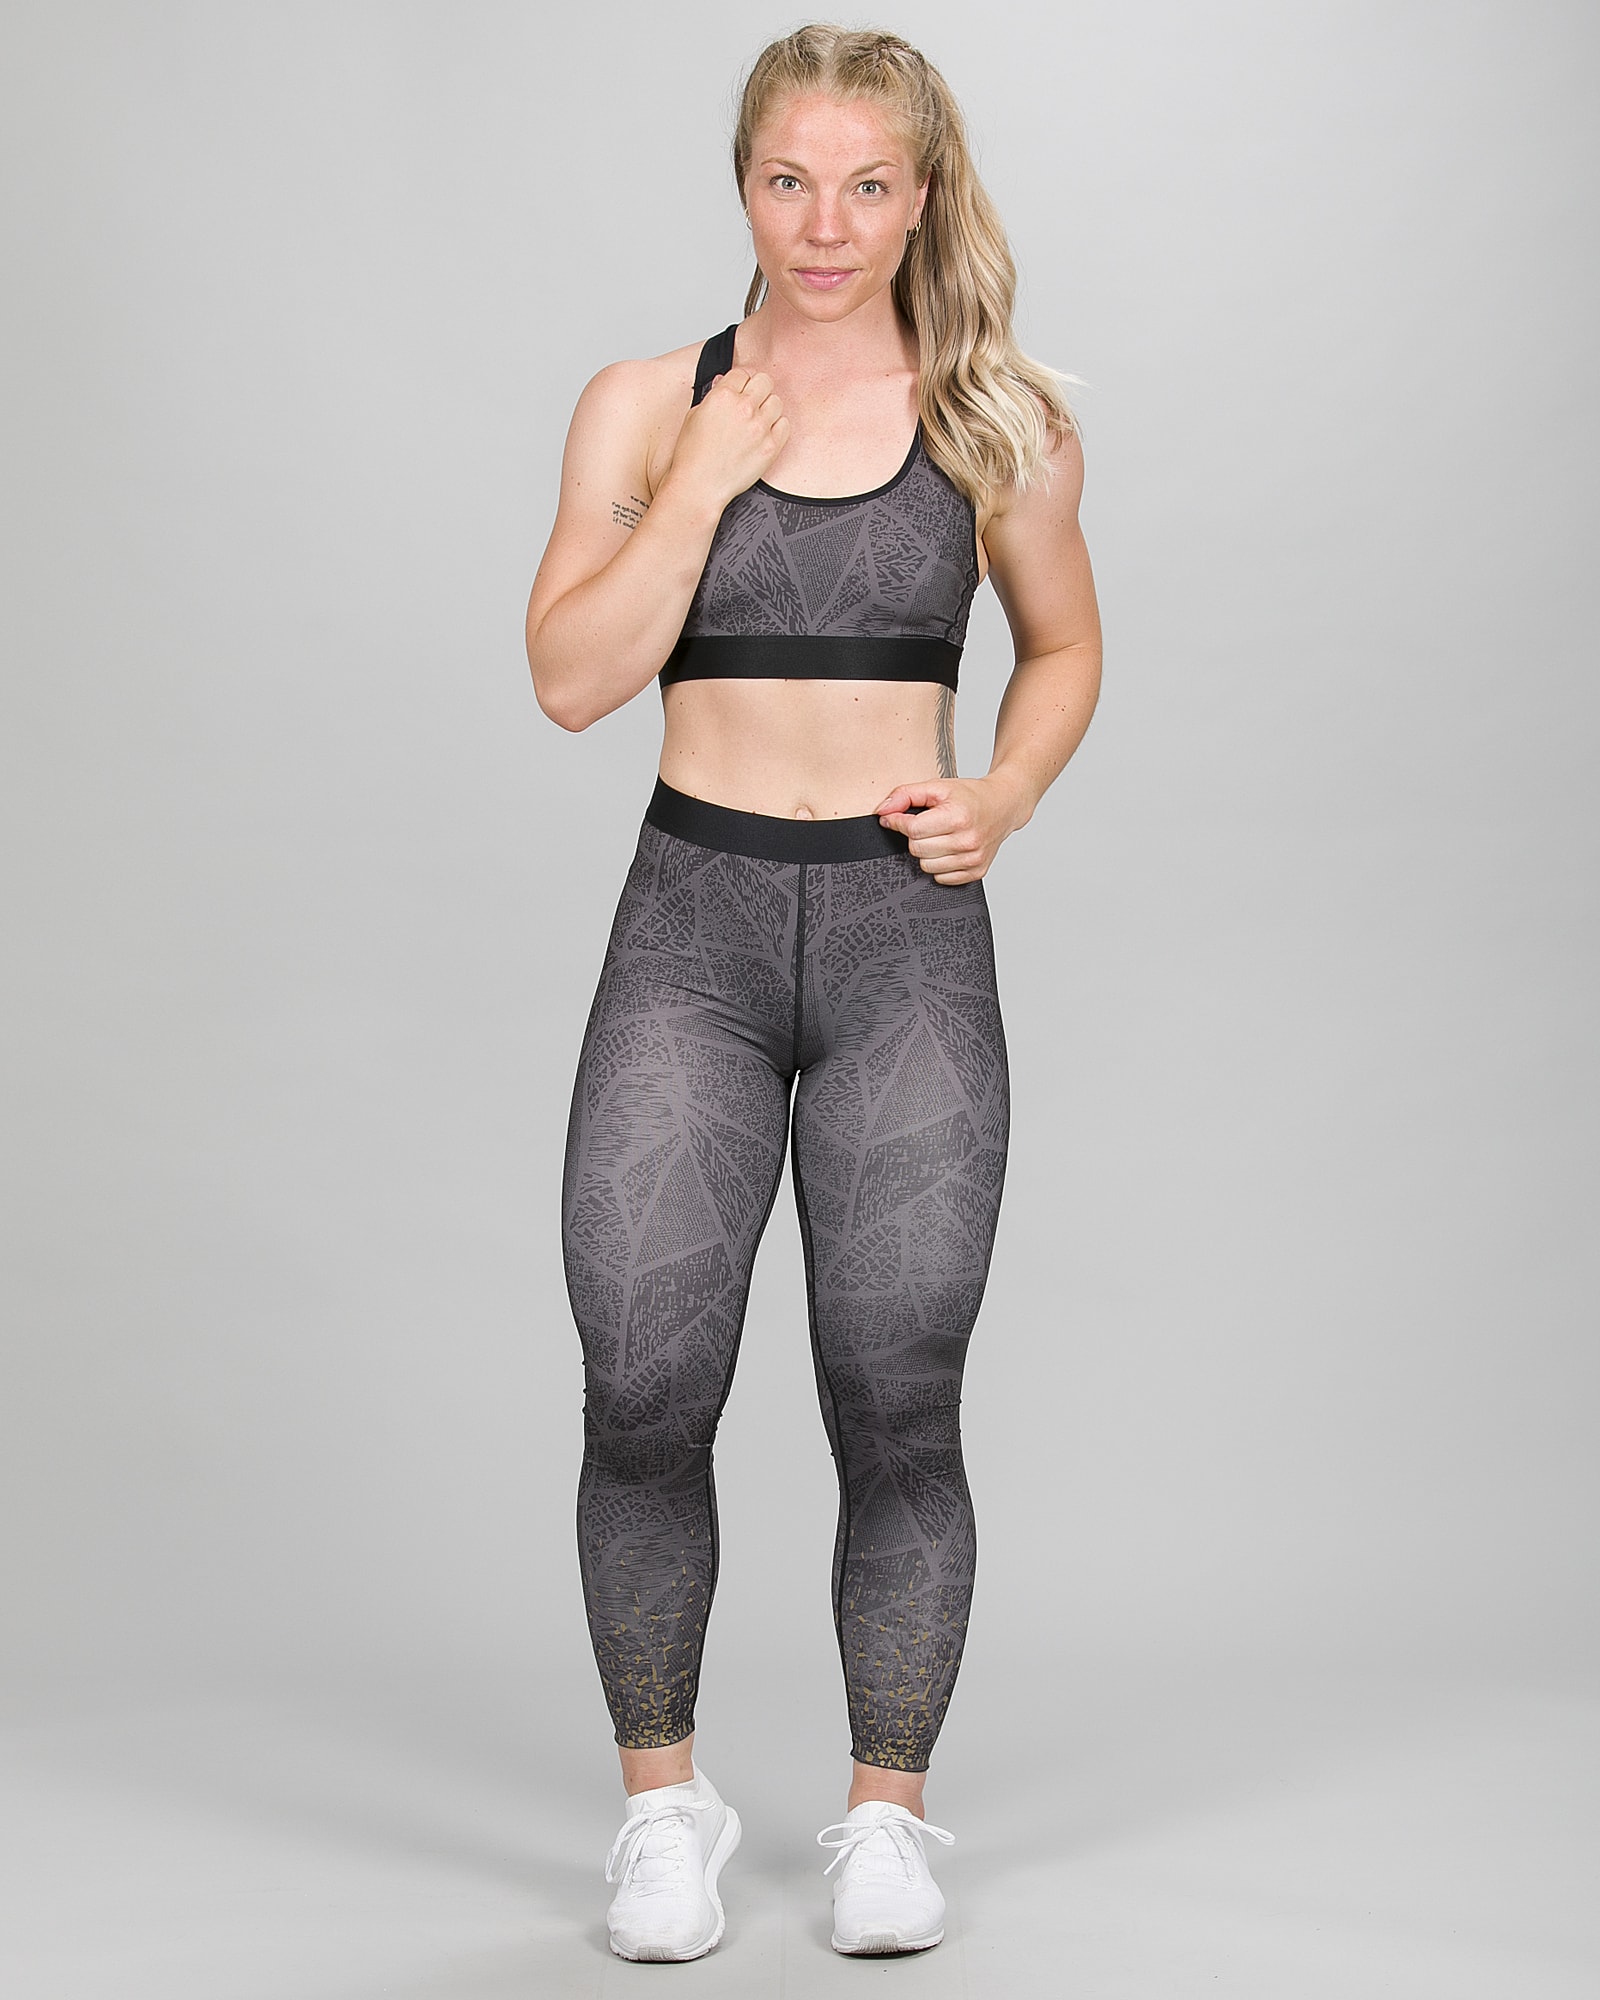 Skiny SK86 Long Running Tights 083114 and Crop Top 082701 - Dark Graphic